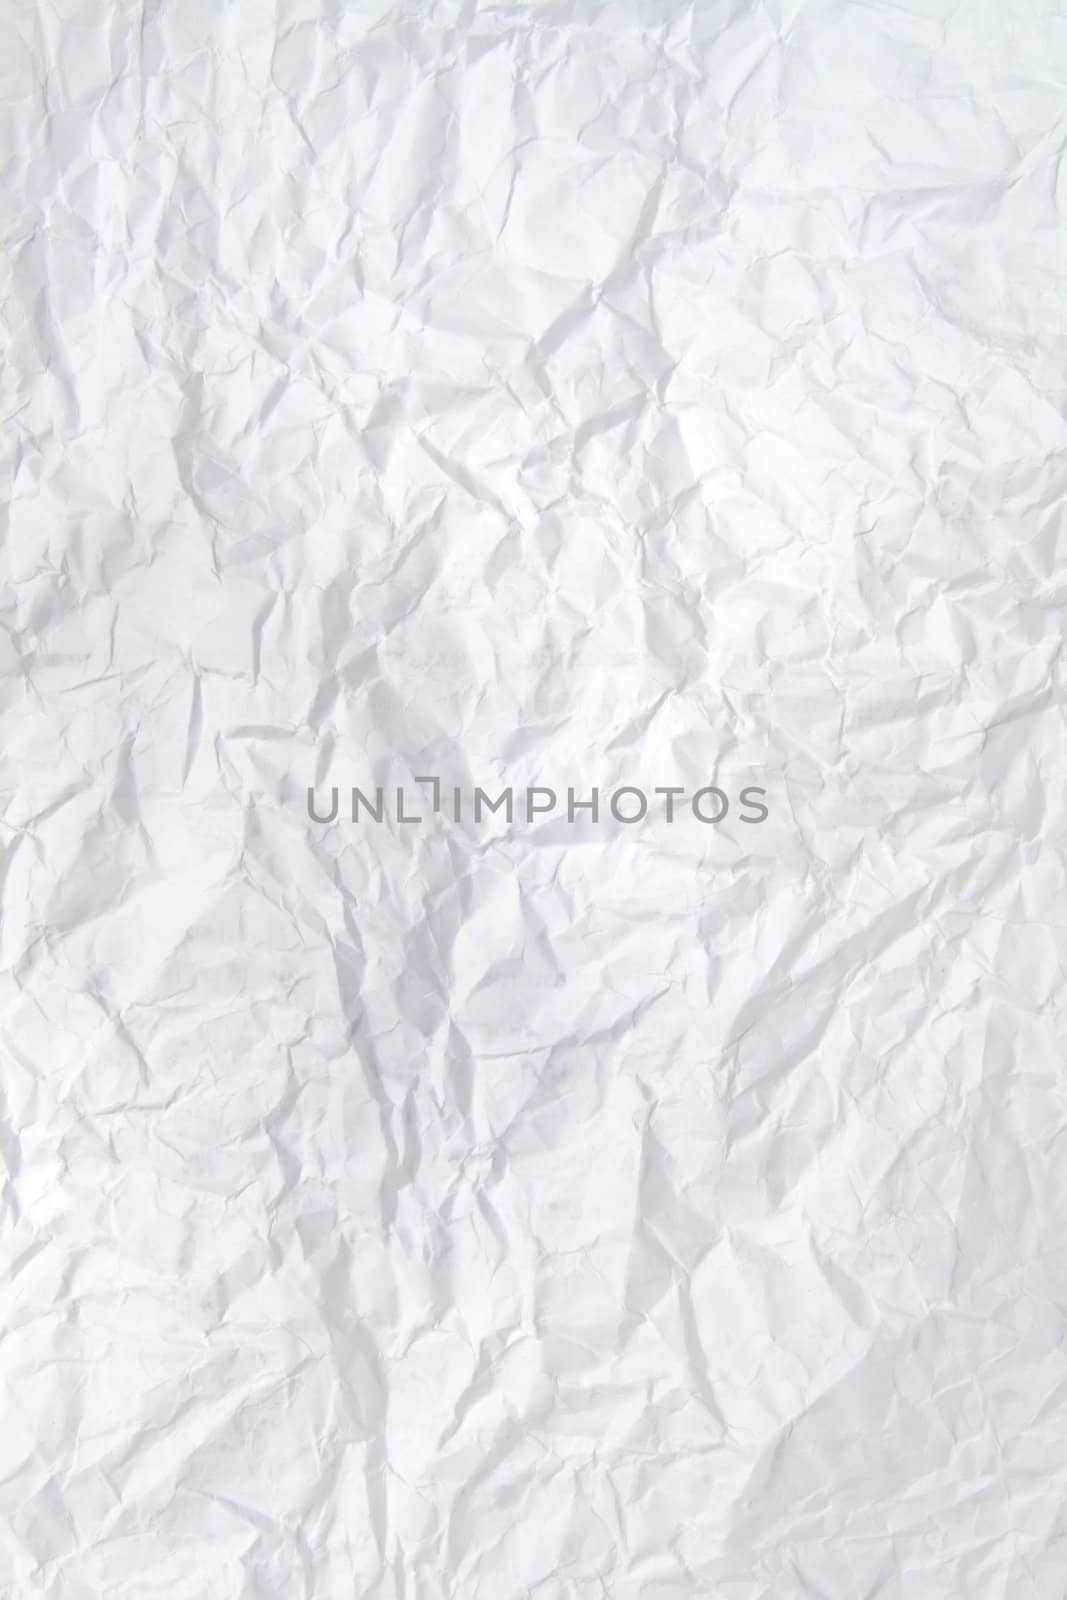 Wrinkled paper using as background